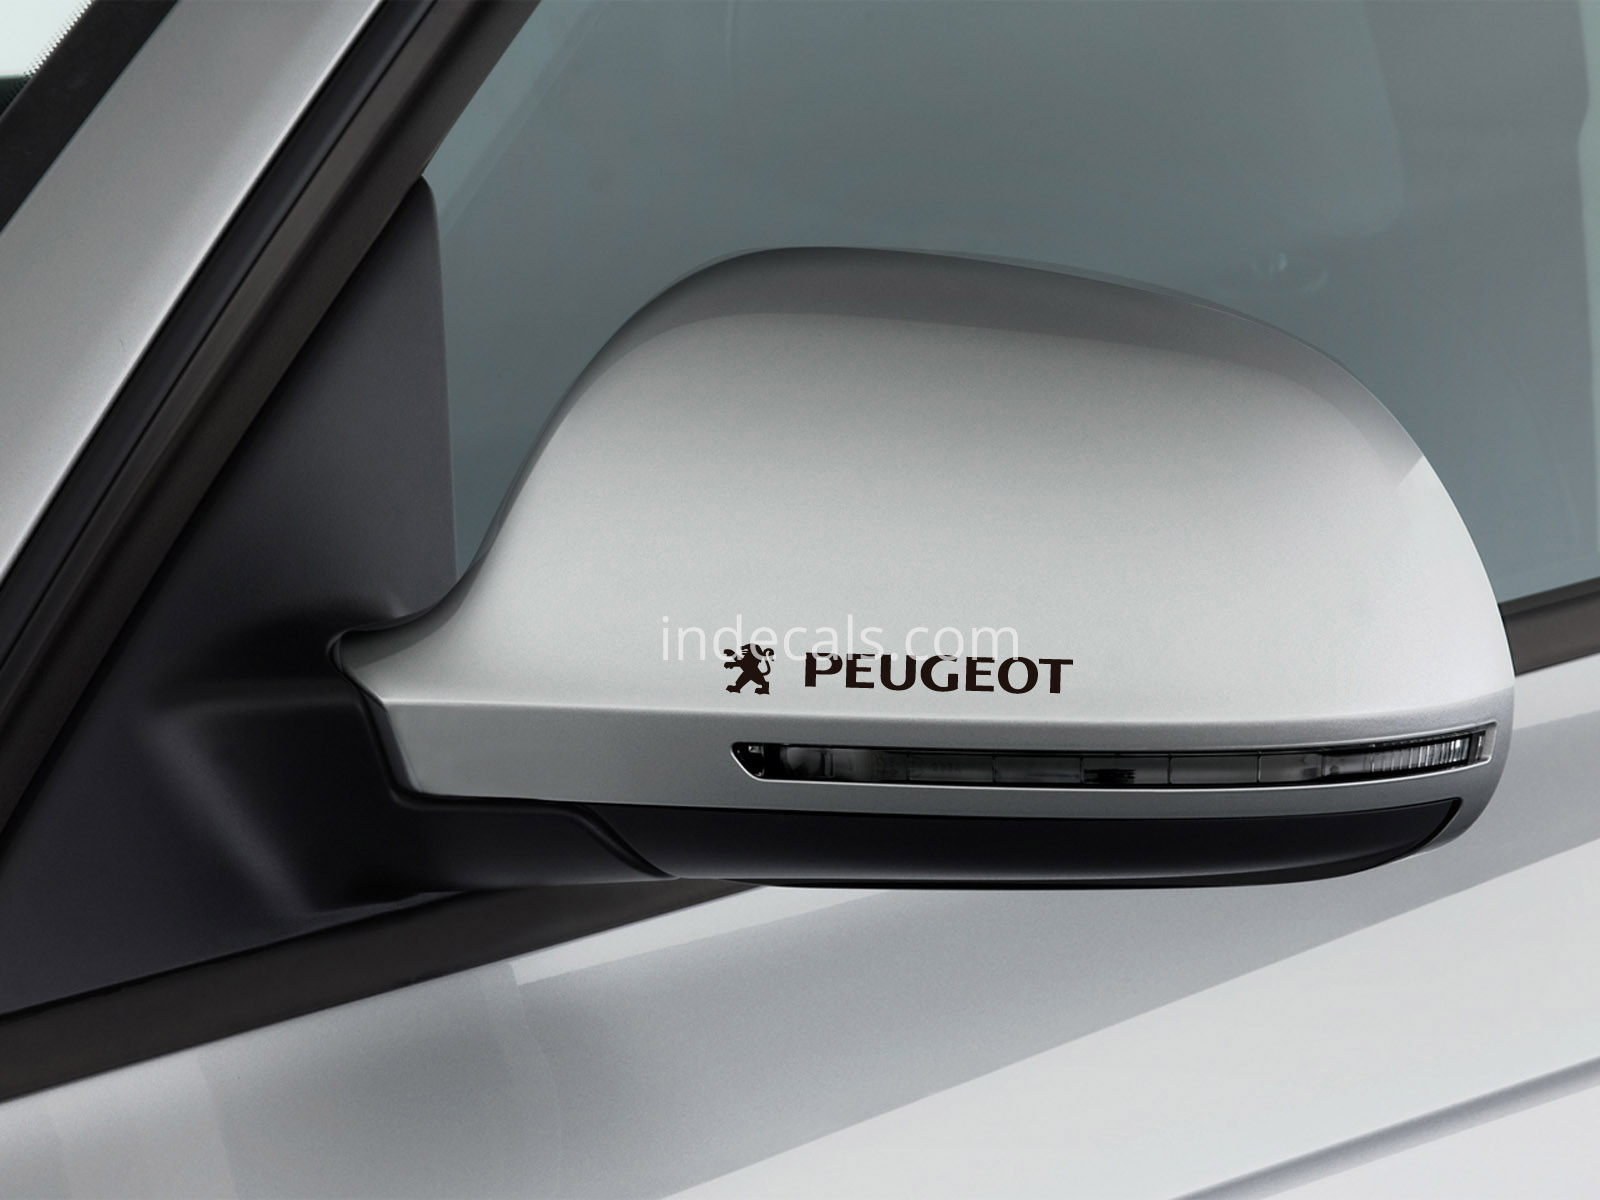 3 x Peugeot Stickers for Mirrors - Black